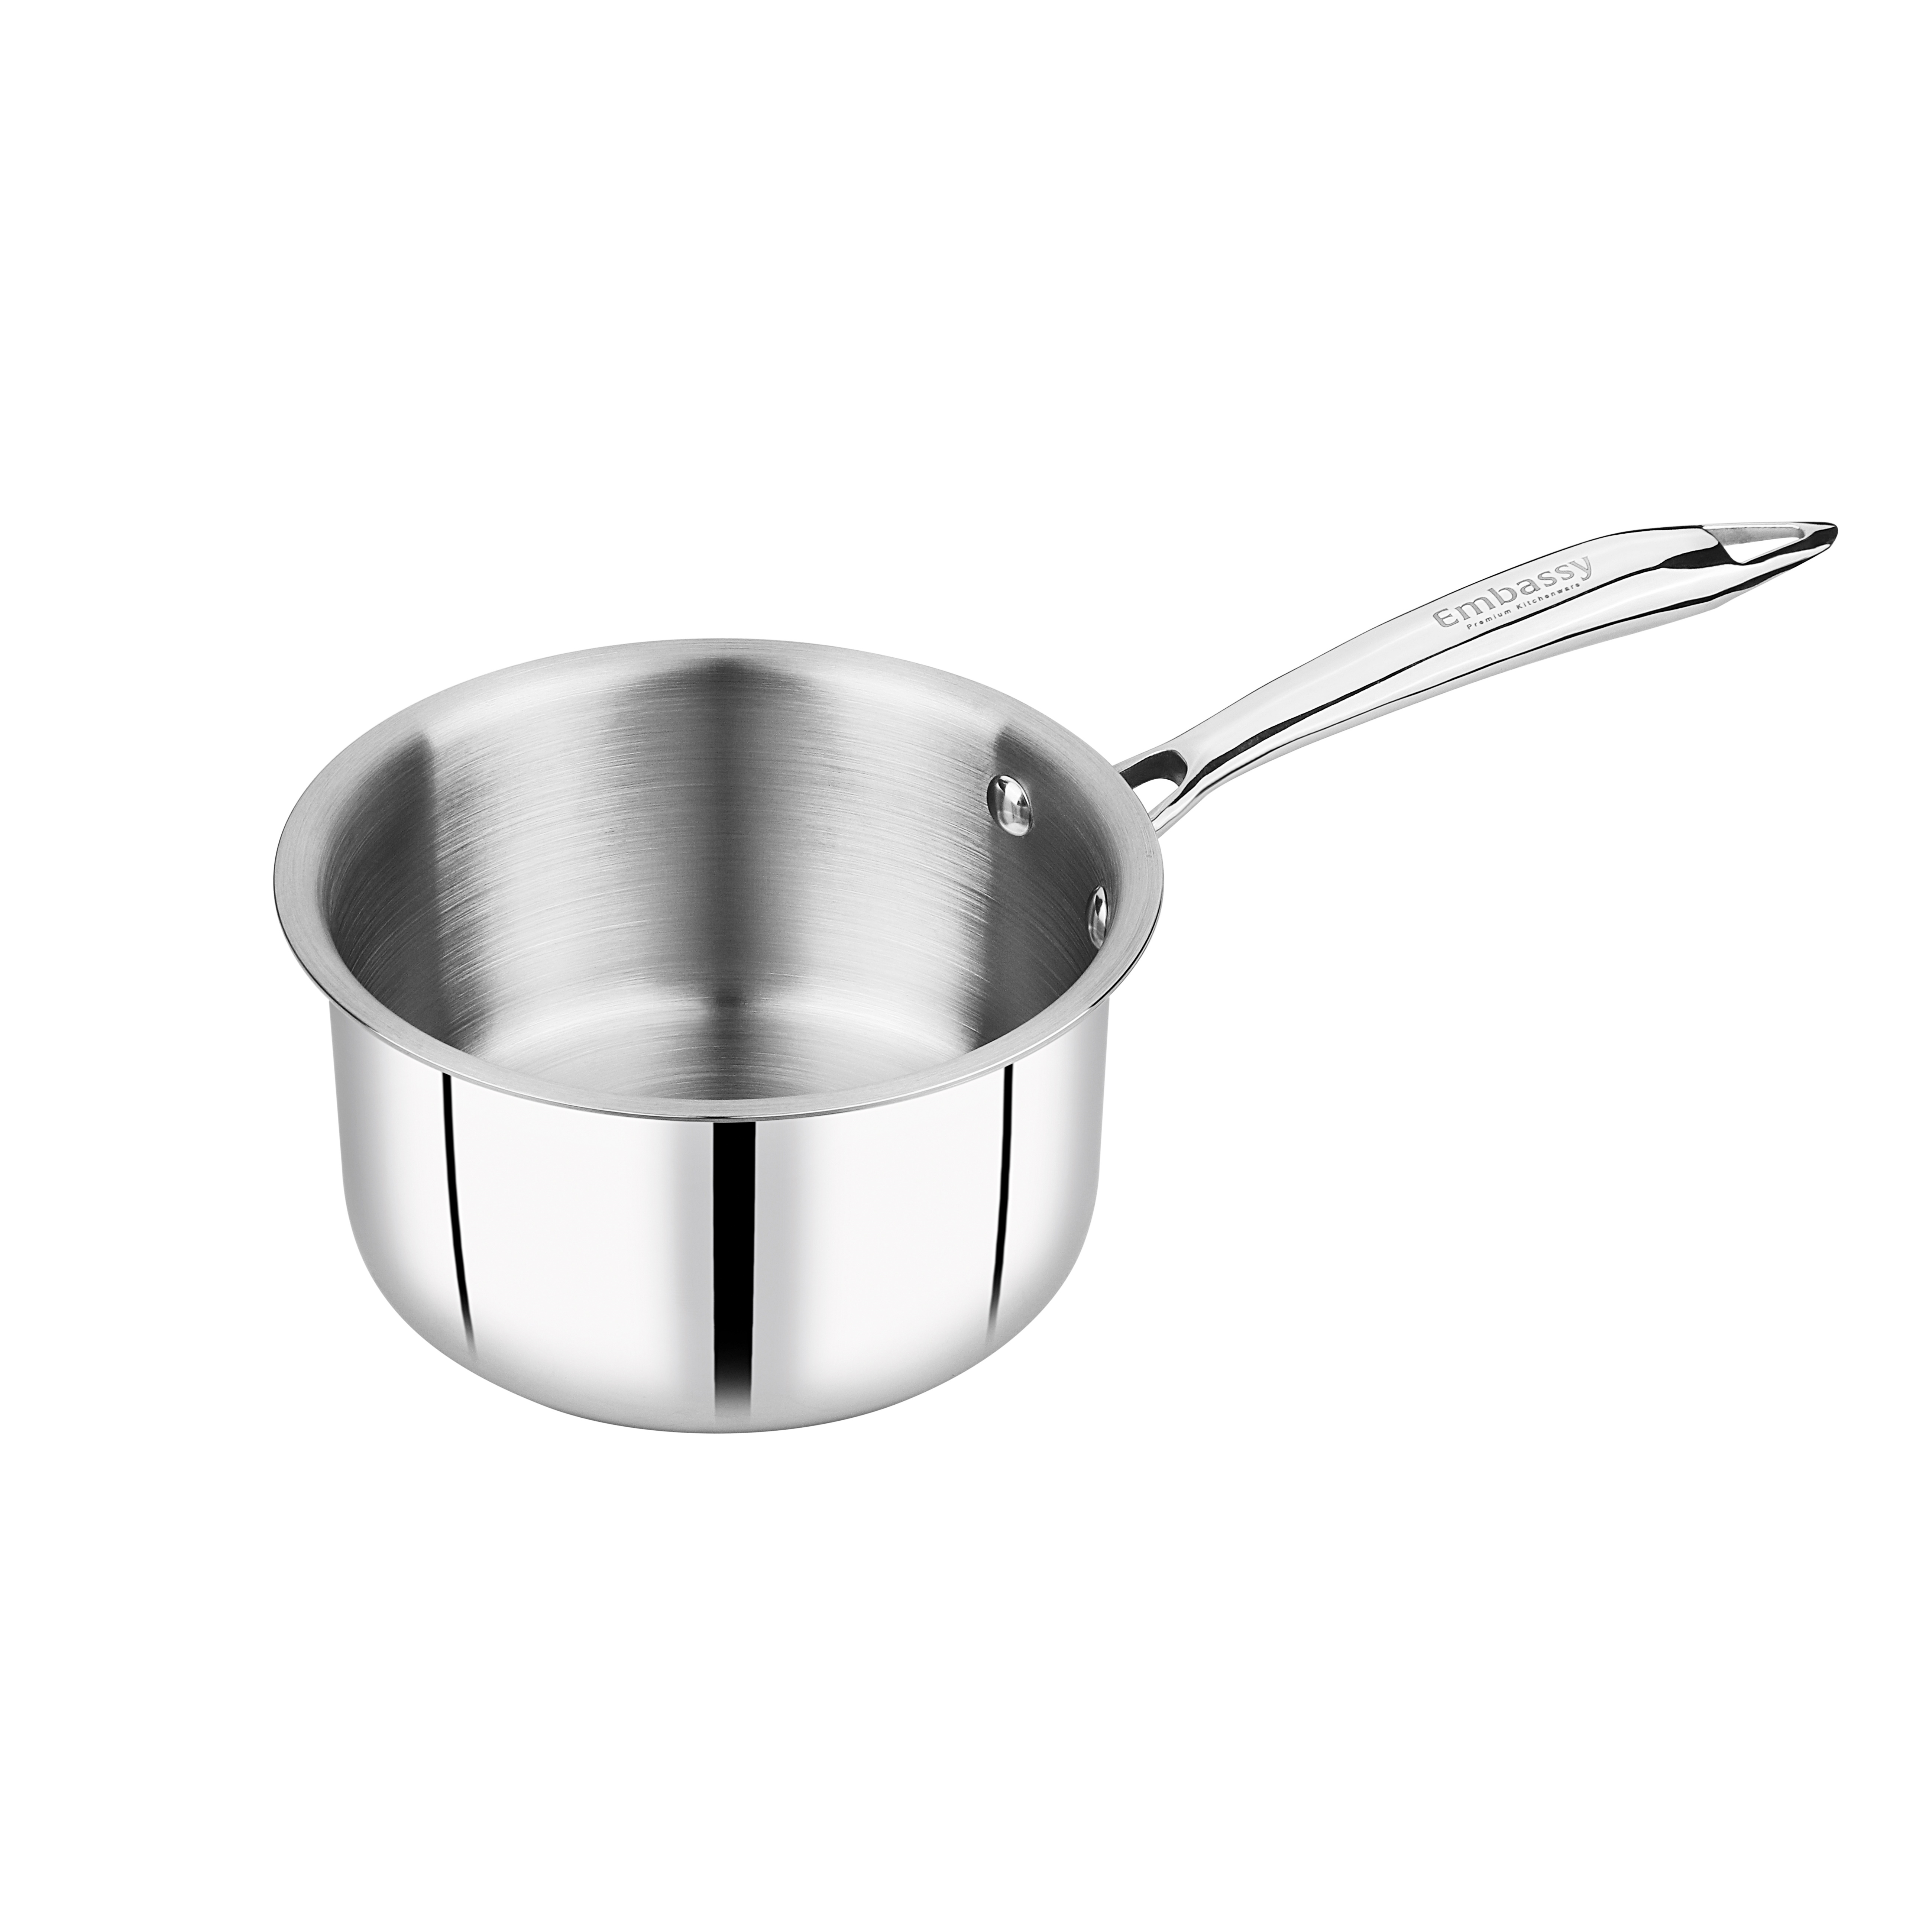 Embassy Stainless Steel Thickply Saucepan With Lid 16cm - Size 12